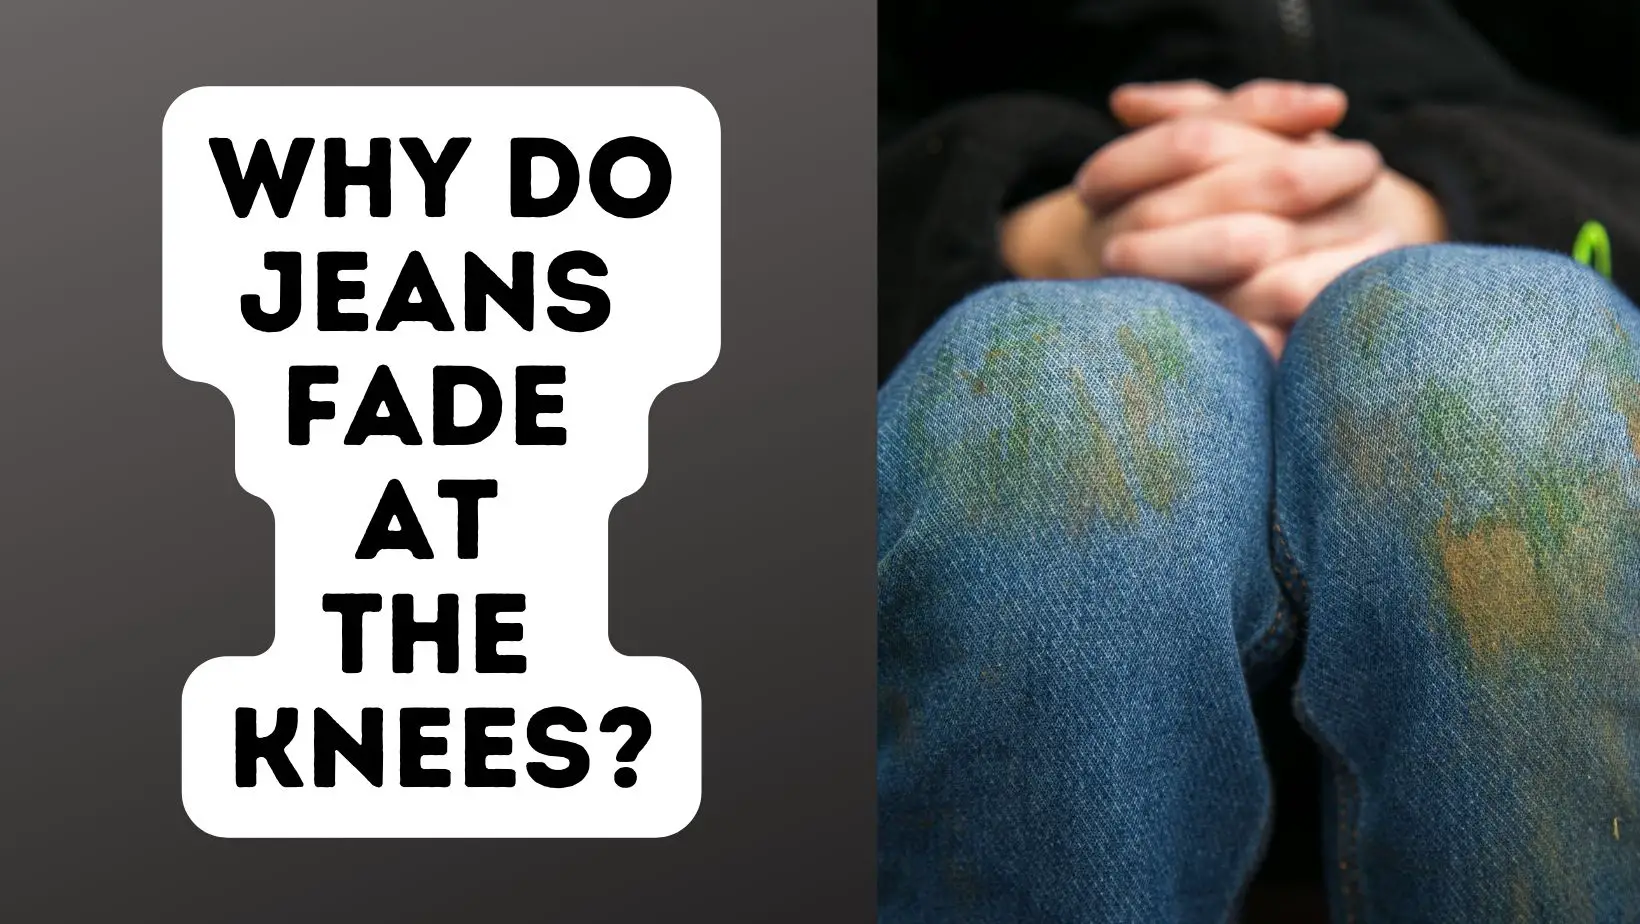 Why Do Jeans Fade At The Knees?